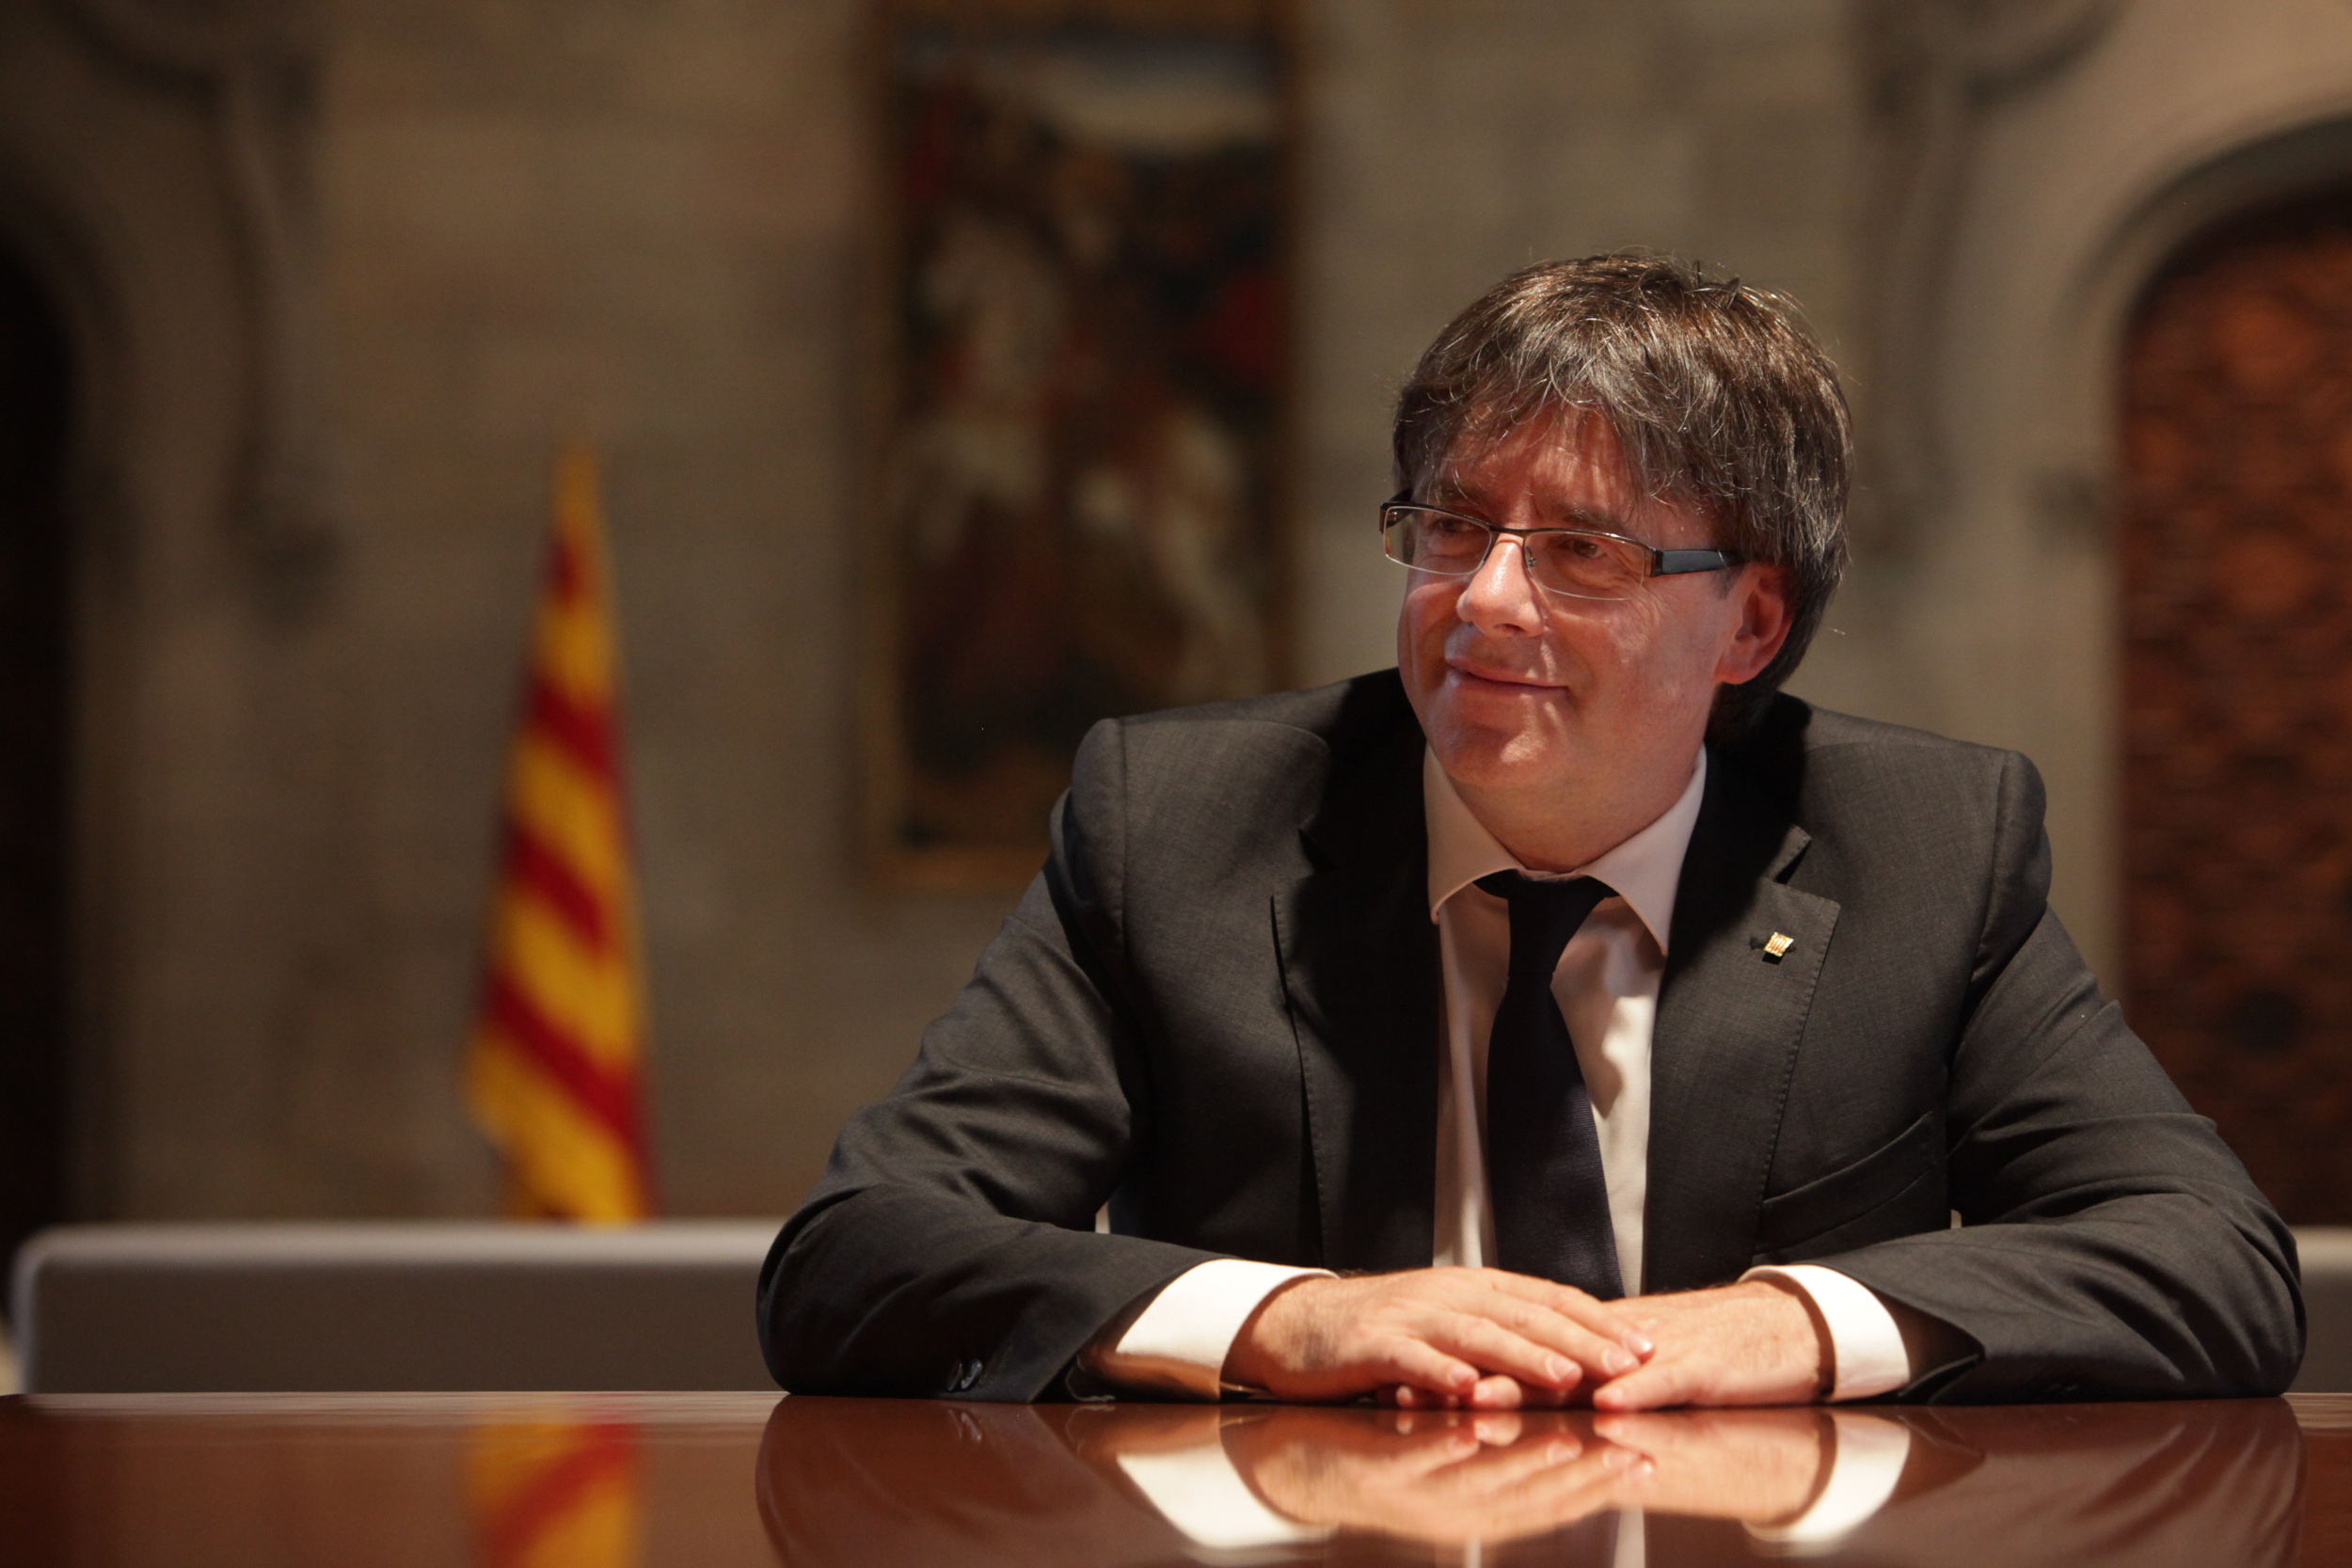 The Catalan President, Carles Puigdemont, during the interview (by V. Gumà)